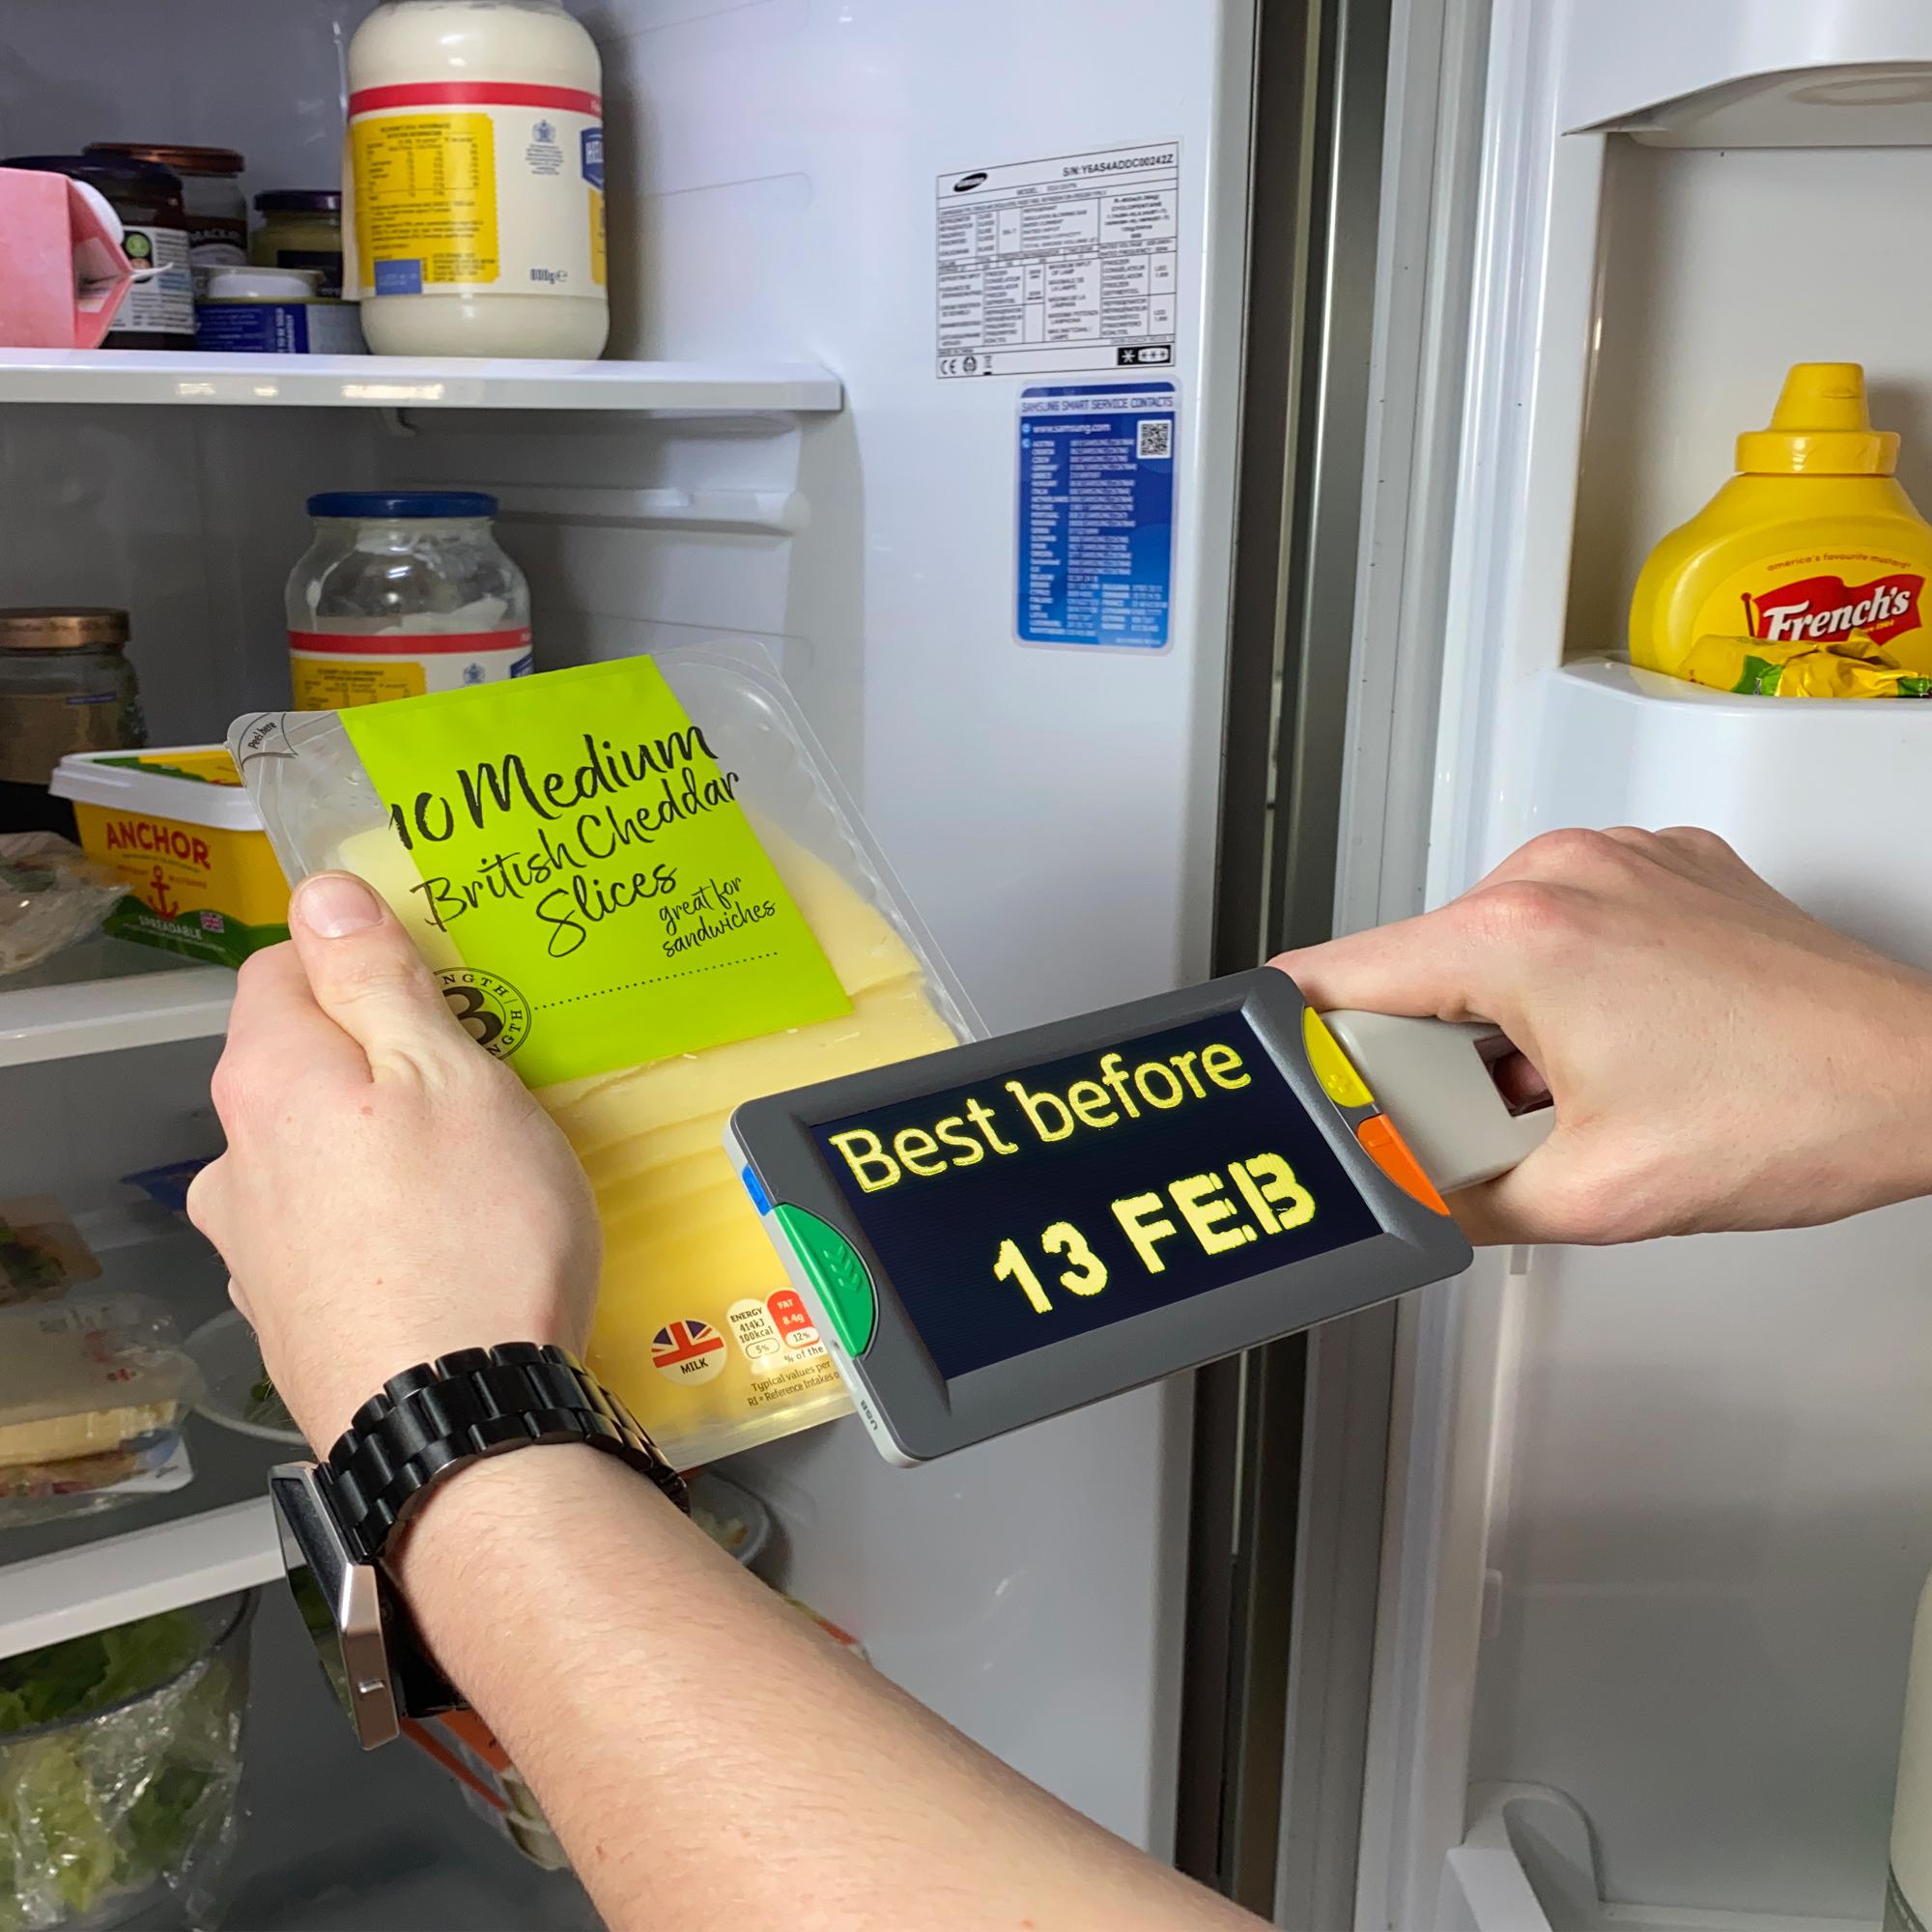 Eye-D v2 magnifying a best before date on a packet of sliced cheese, text shown in enchanced colours; yellow on black